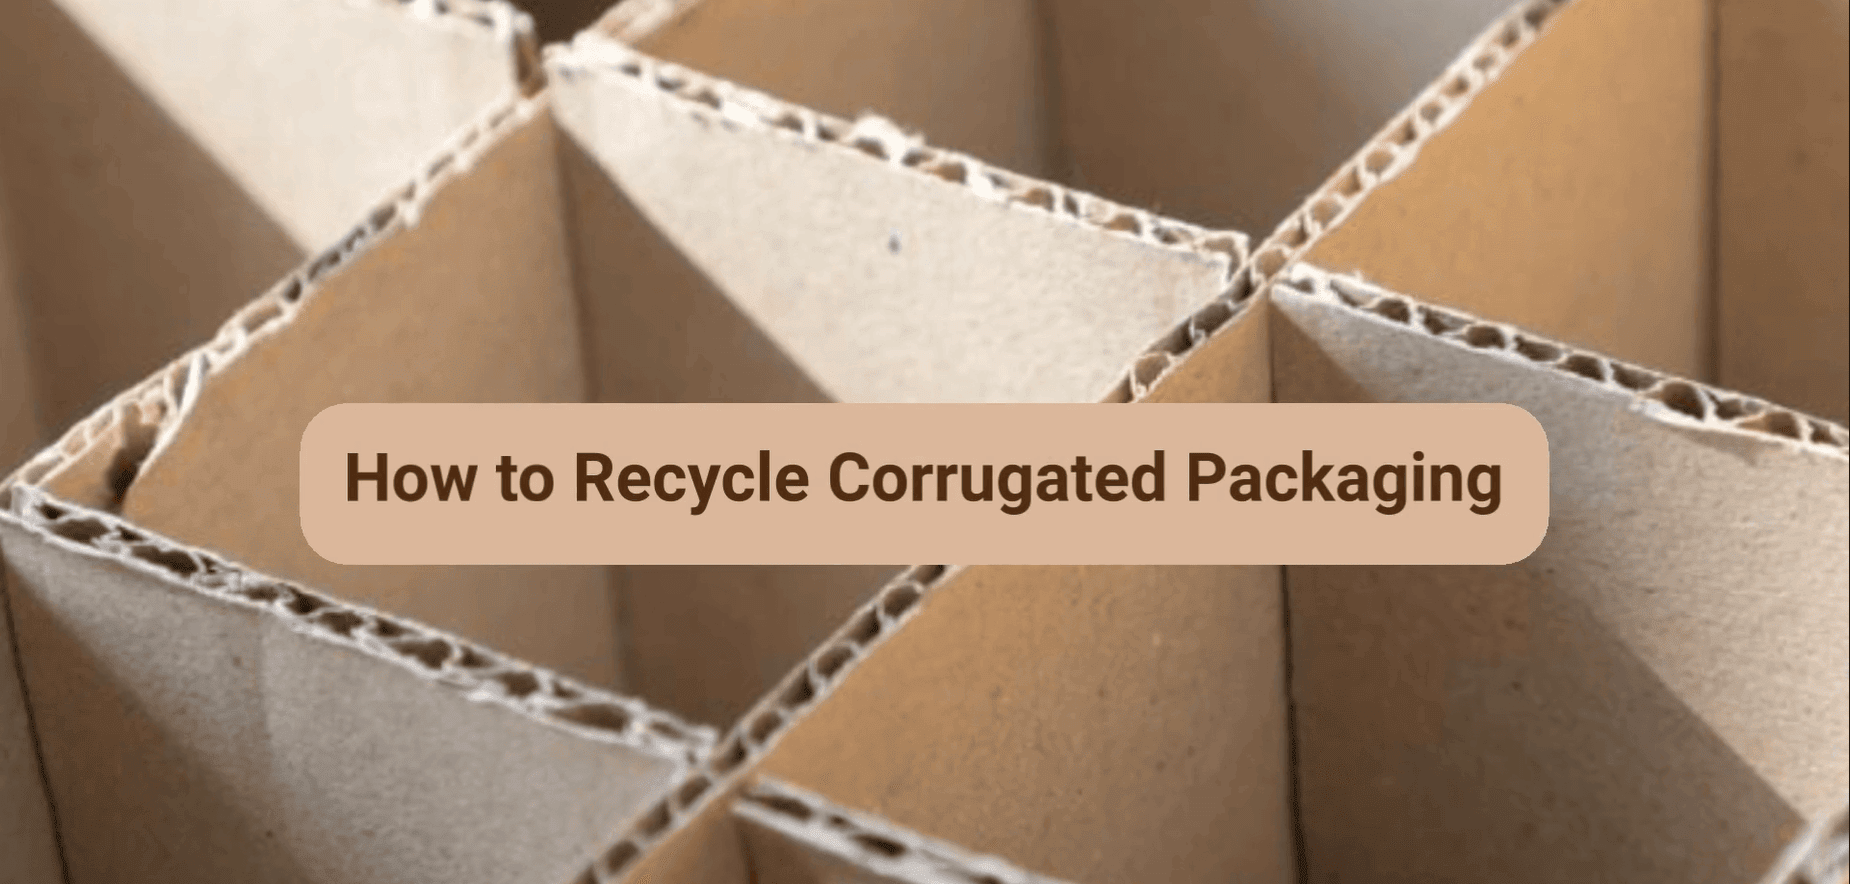 How to Recycle Corrugated Packaging